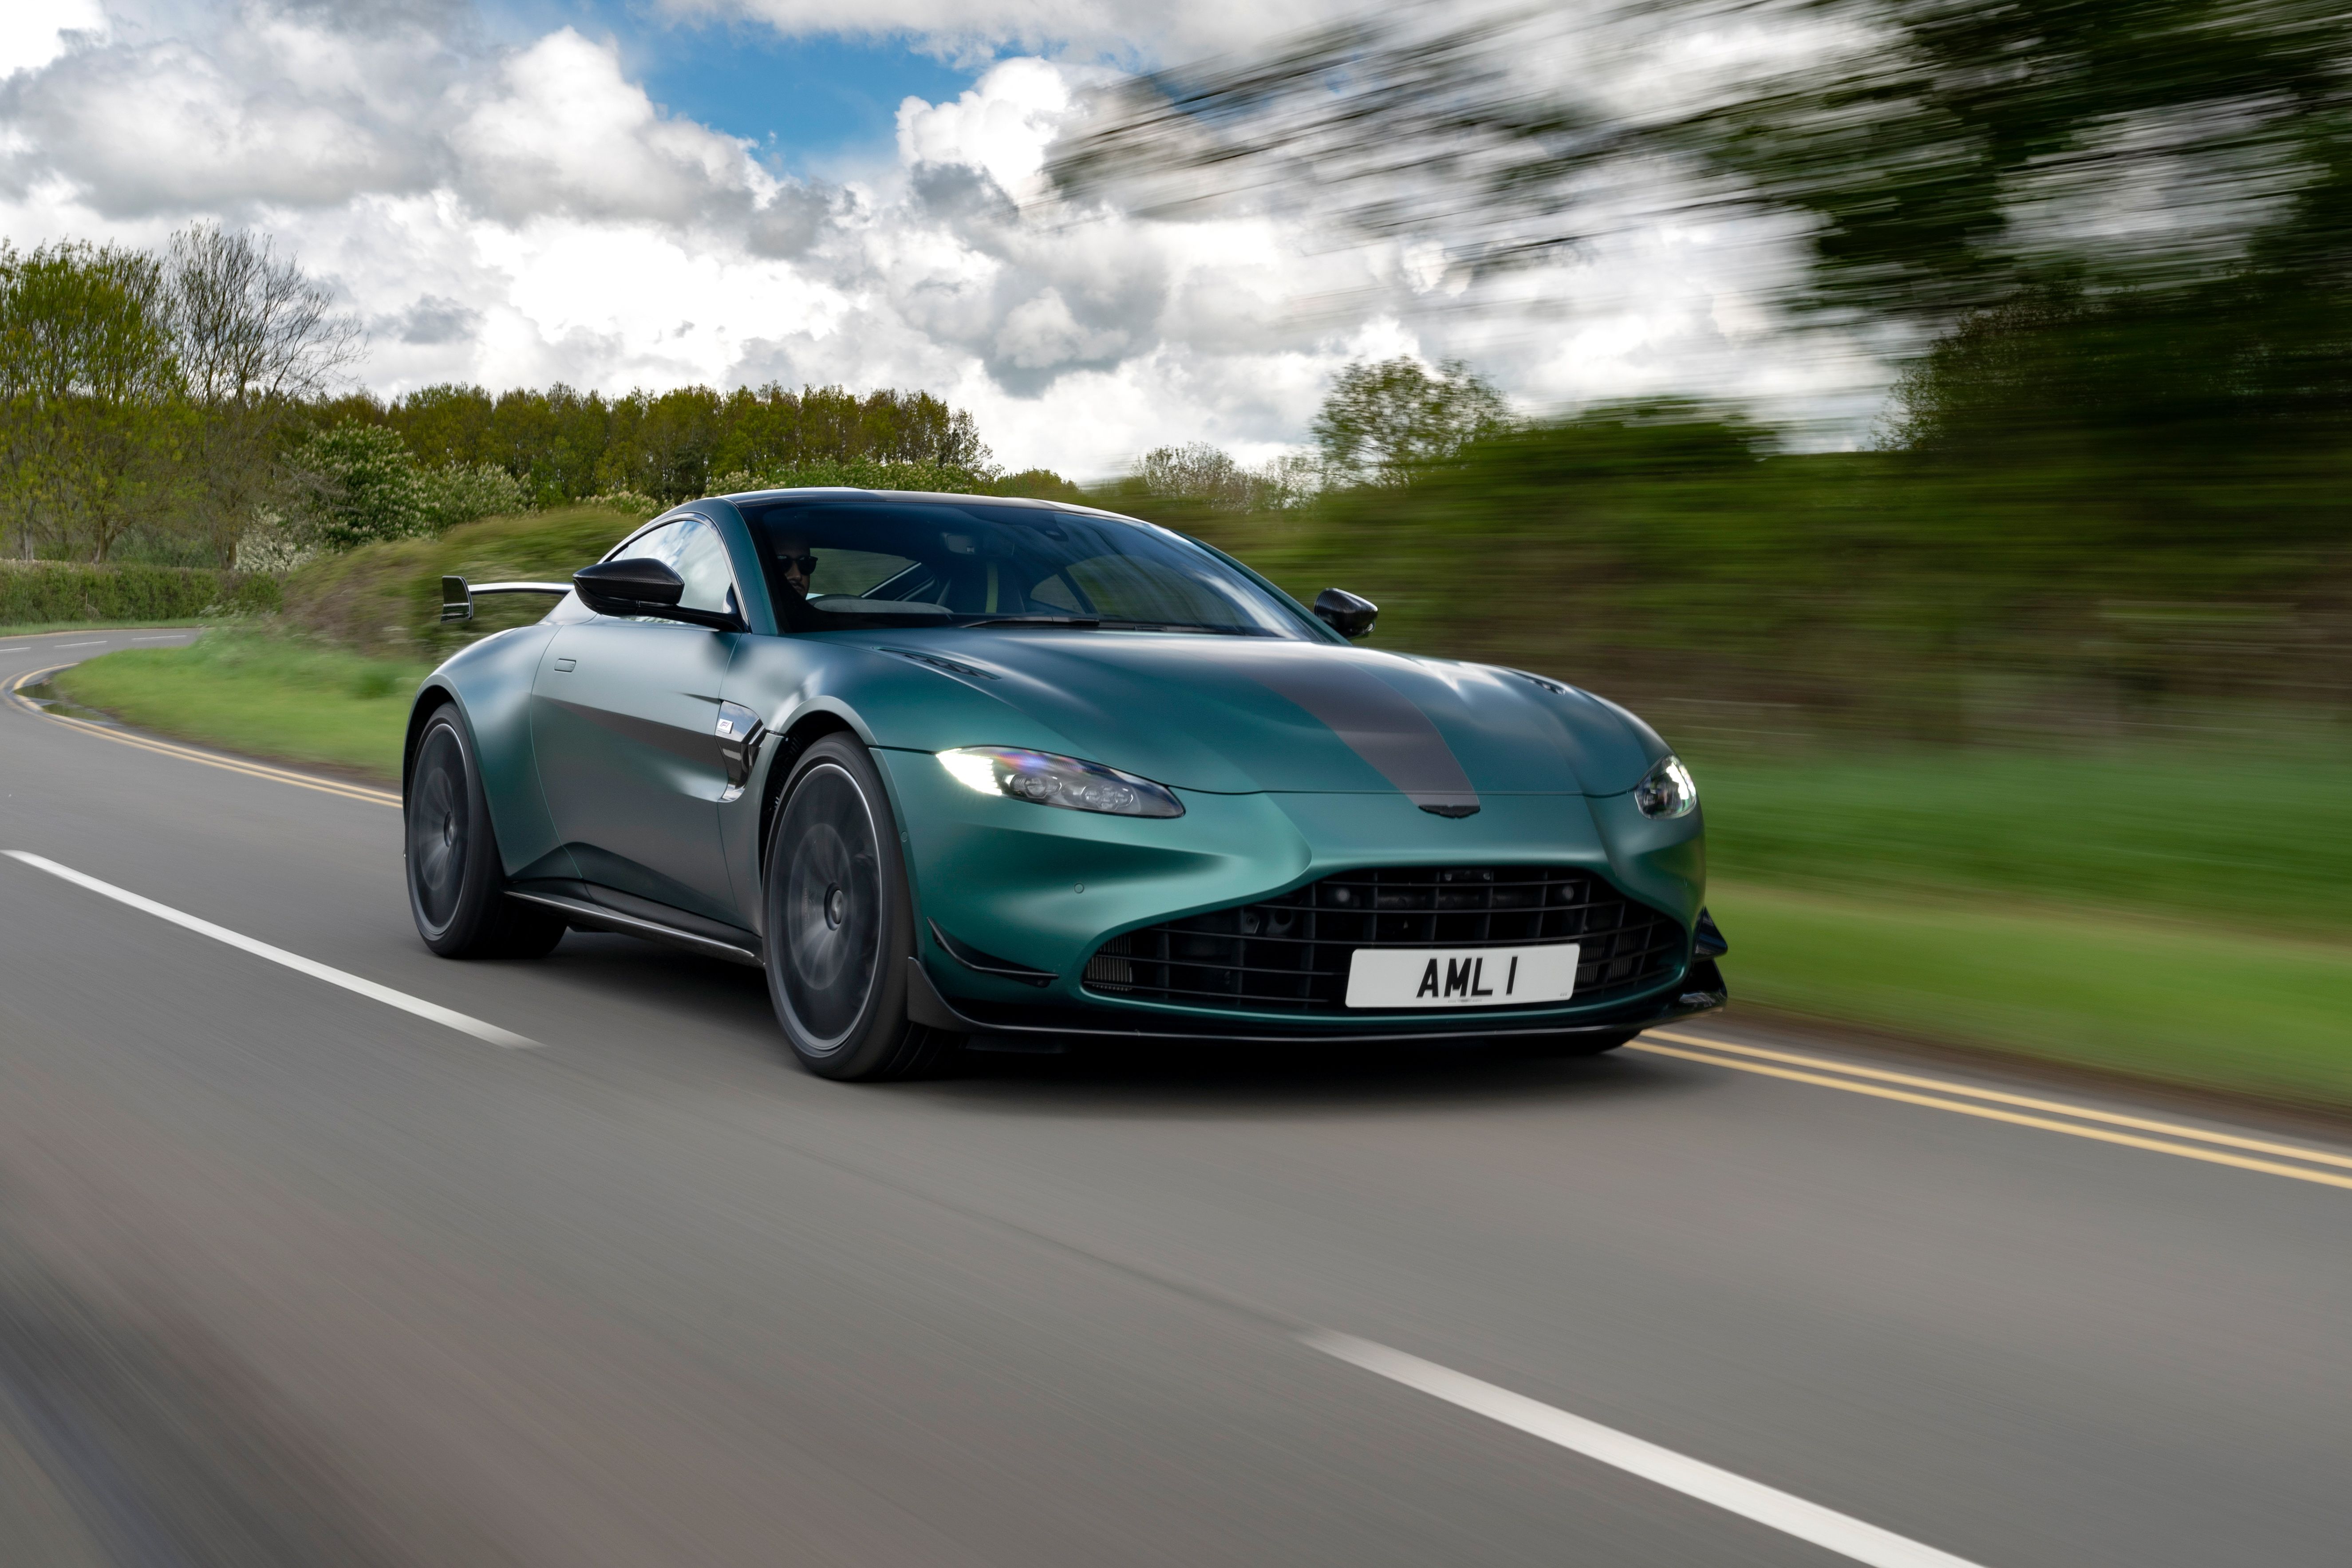 Aston Martin F1 2021  This is the story of Aston Martin Racing 